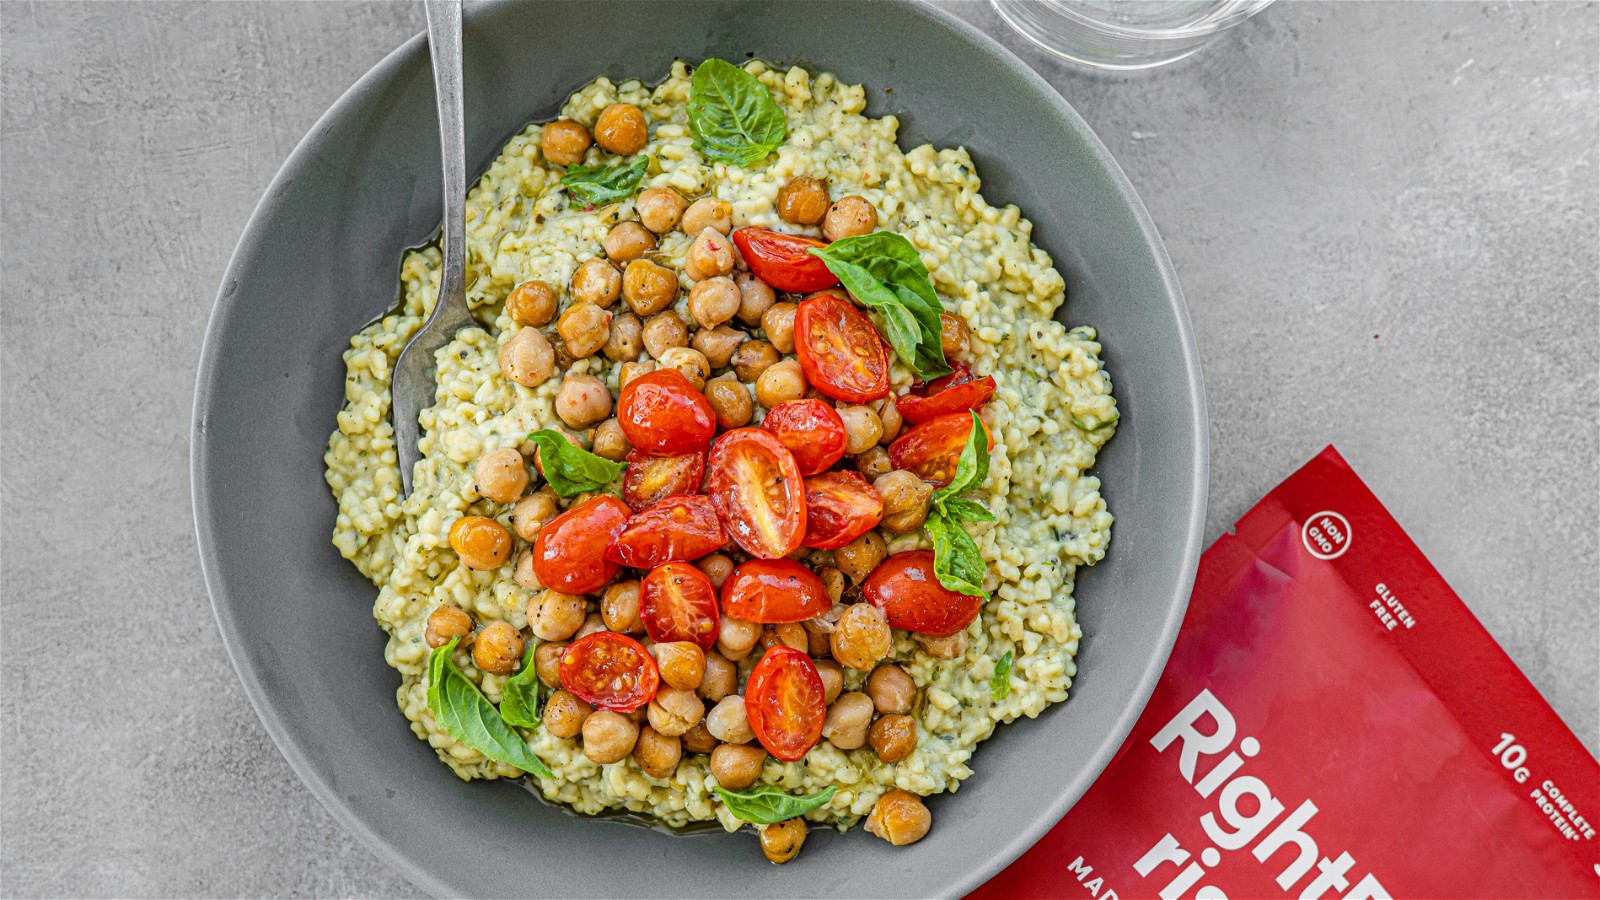 Image of Basil Pesto RightRice Risotto with Crispy Chickpeas & Roasted Tomatoes